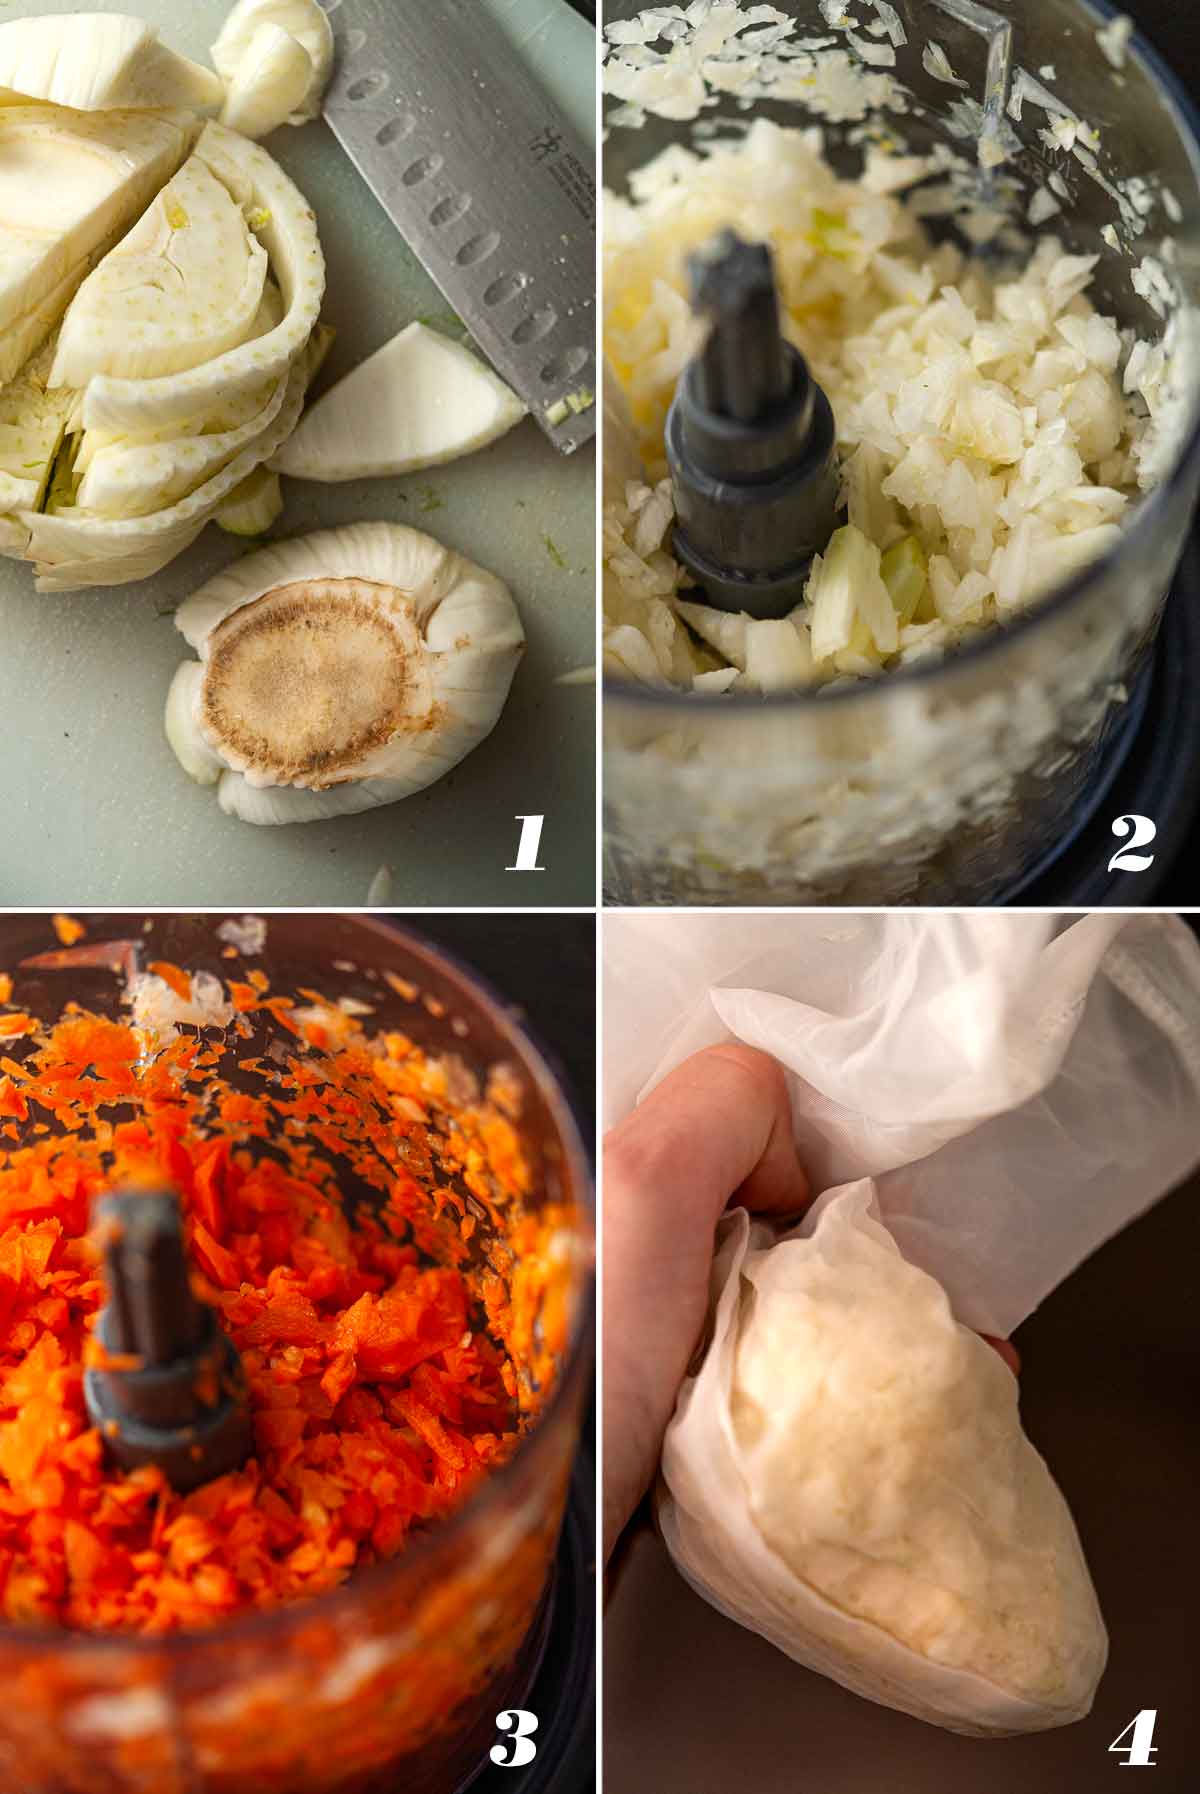 A collage of 4 numbered images showing how to make curried coleslaw.